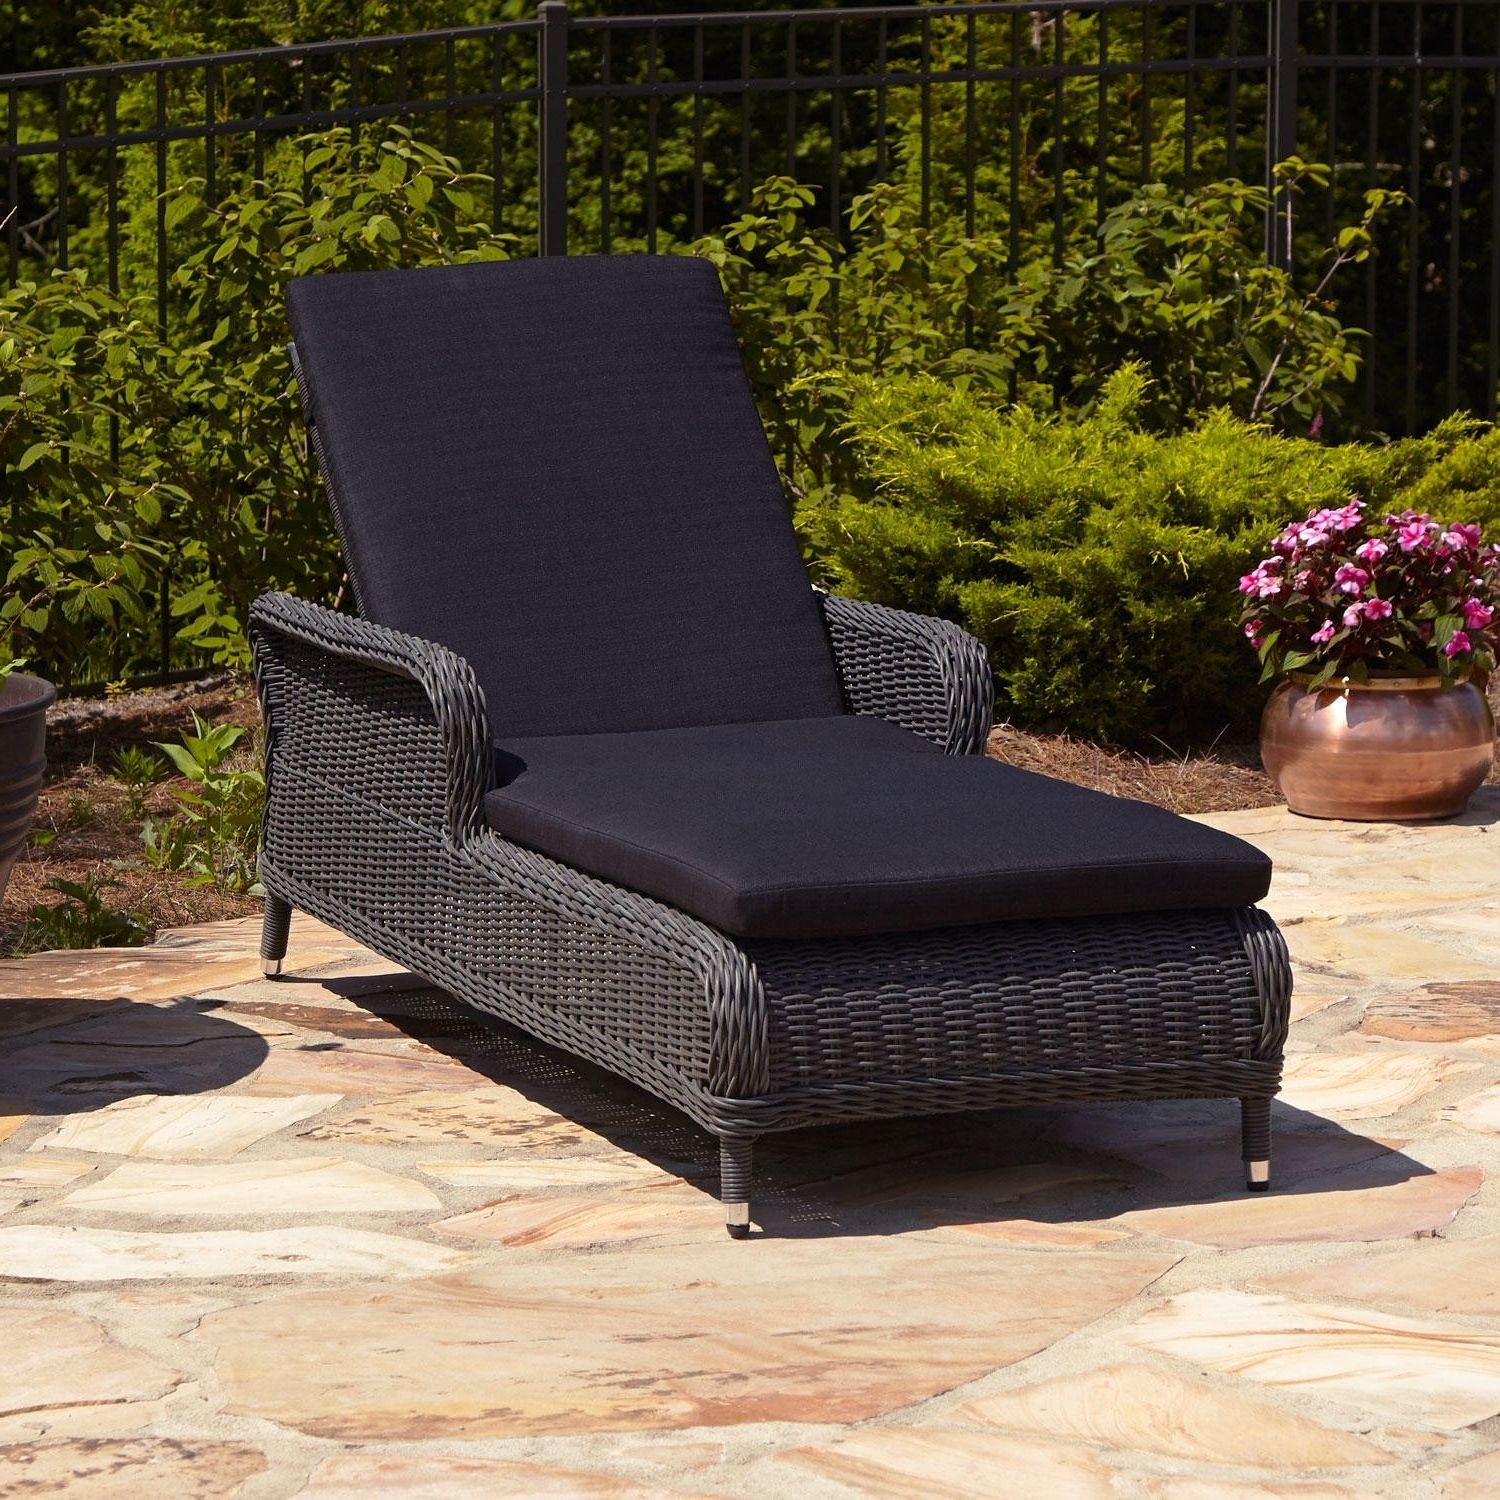 Chaise Lounge Reclining Chairs For Outdoor Pertaining To Most Up To Date Convertible Chair : Pool Deck Lounge Chairs Outdoor Tanning Chair (View 6 of 15)